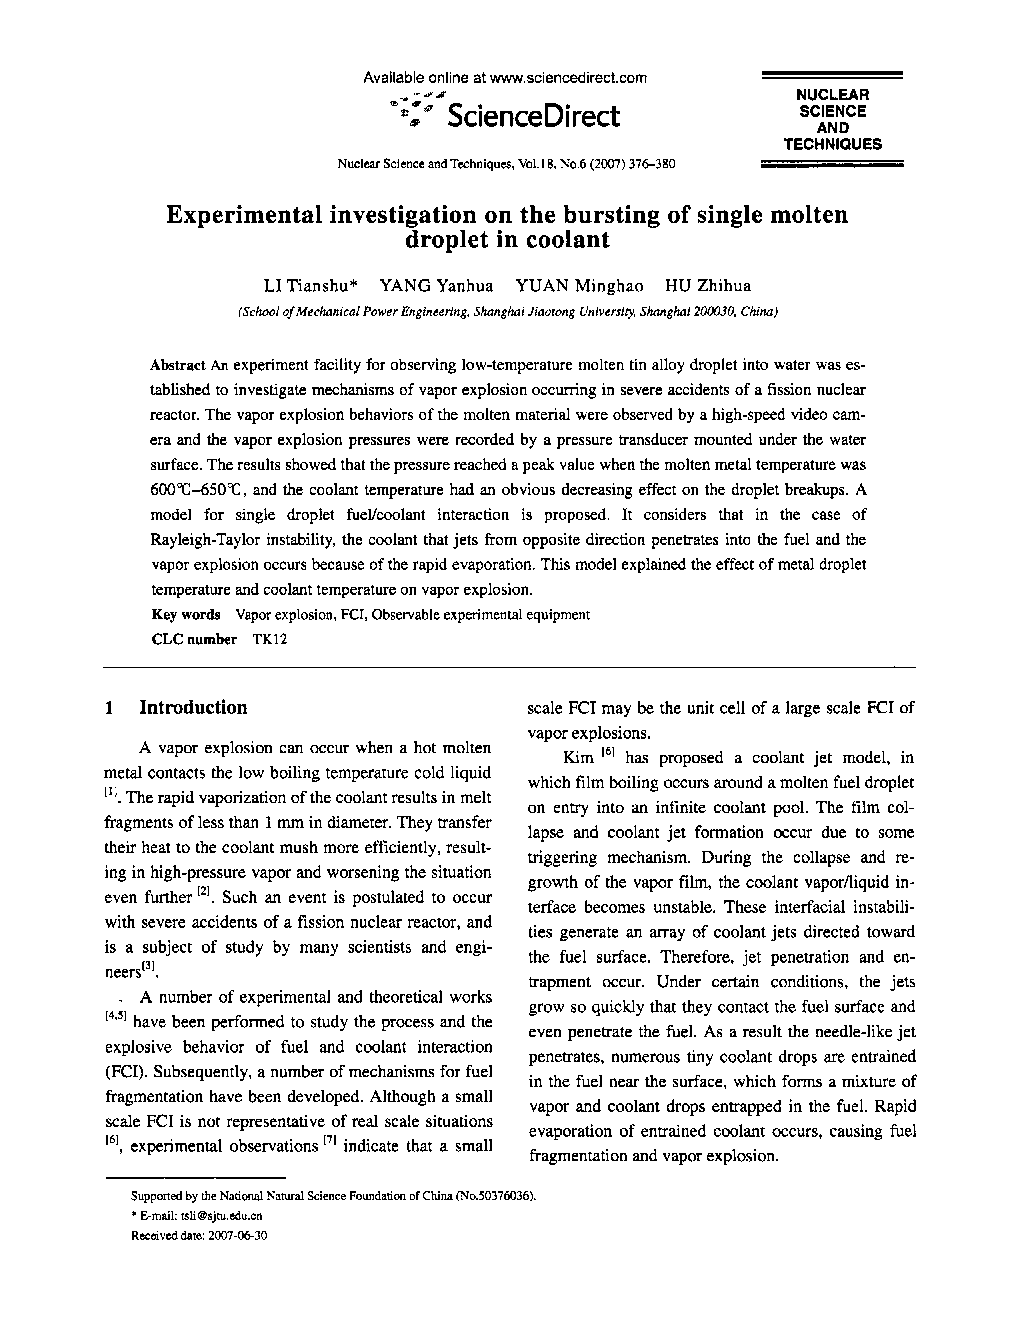 Experimental investigation on the bursting of single molten droplet in coolant